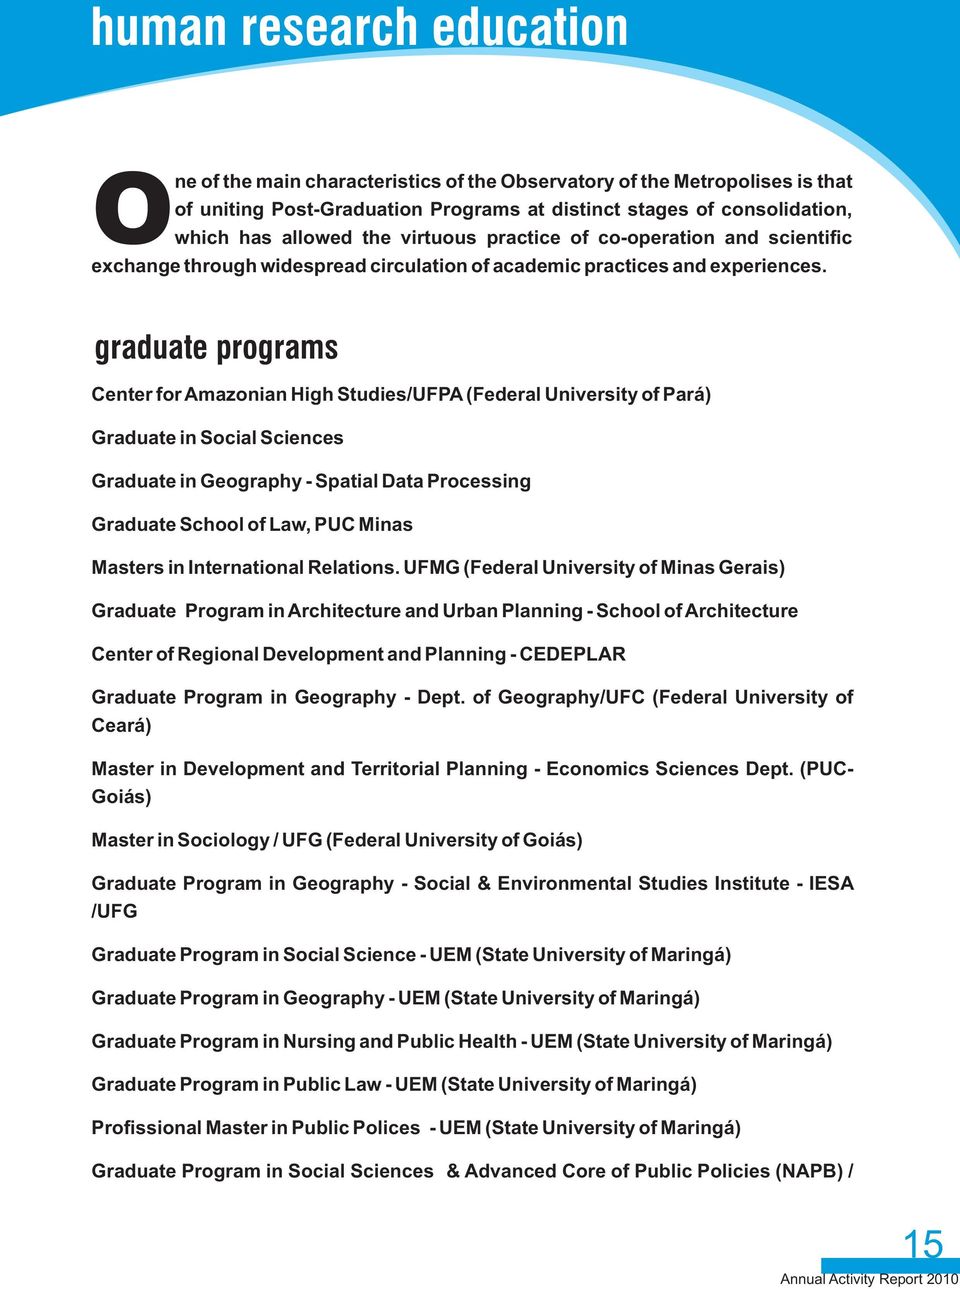 graduate programs Center for Amazonian High Studies/UFPA (Federal University of Pará) Graduate in Social Sciences Graduate in Geography - Spatial Data Processing Graduate School of Law, PUC Minas